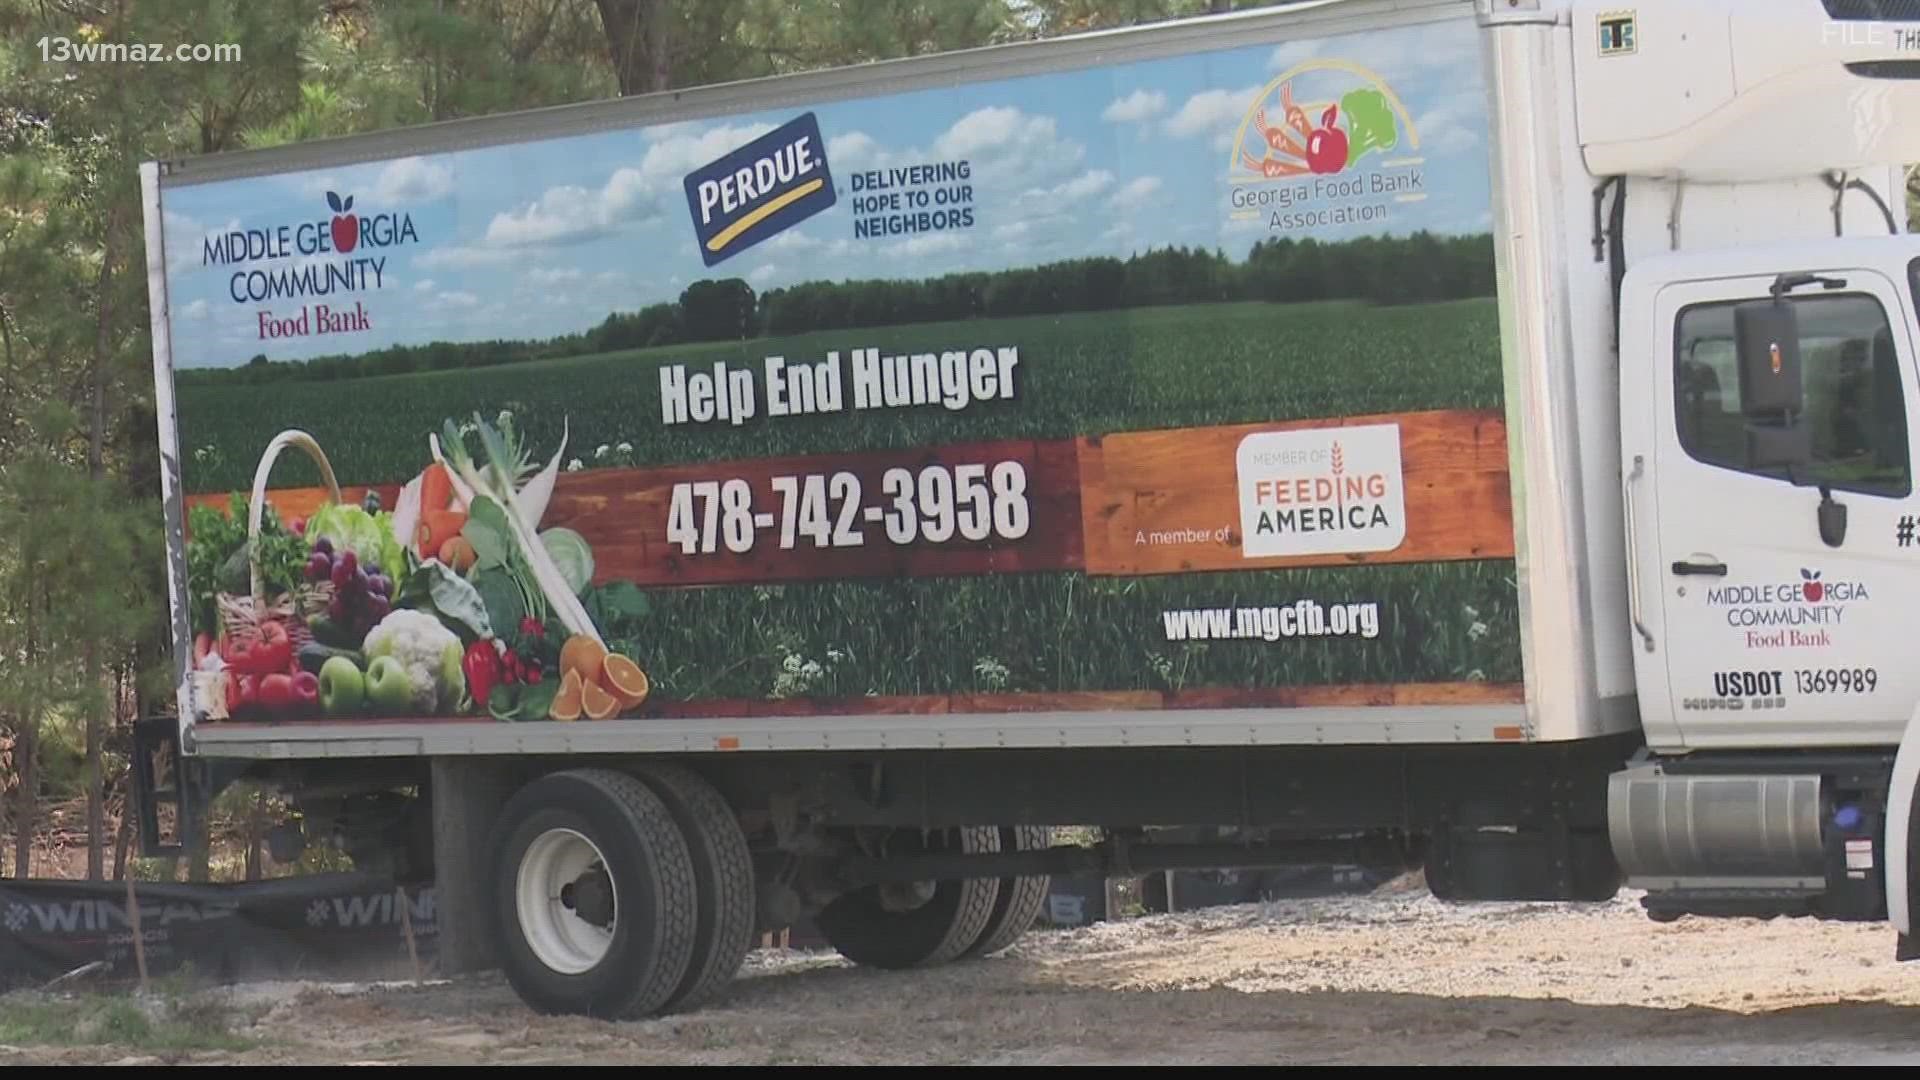 Folks in counties like Wilcox, Baldwin, Bleckley, and Pulaski worry how they will feed their neighbors during the holidays.